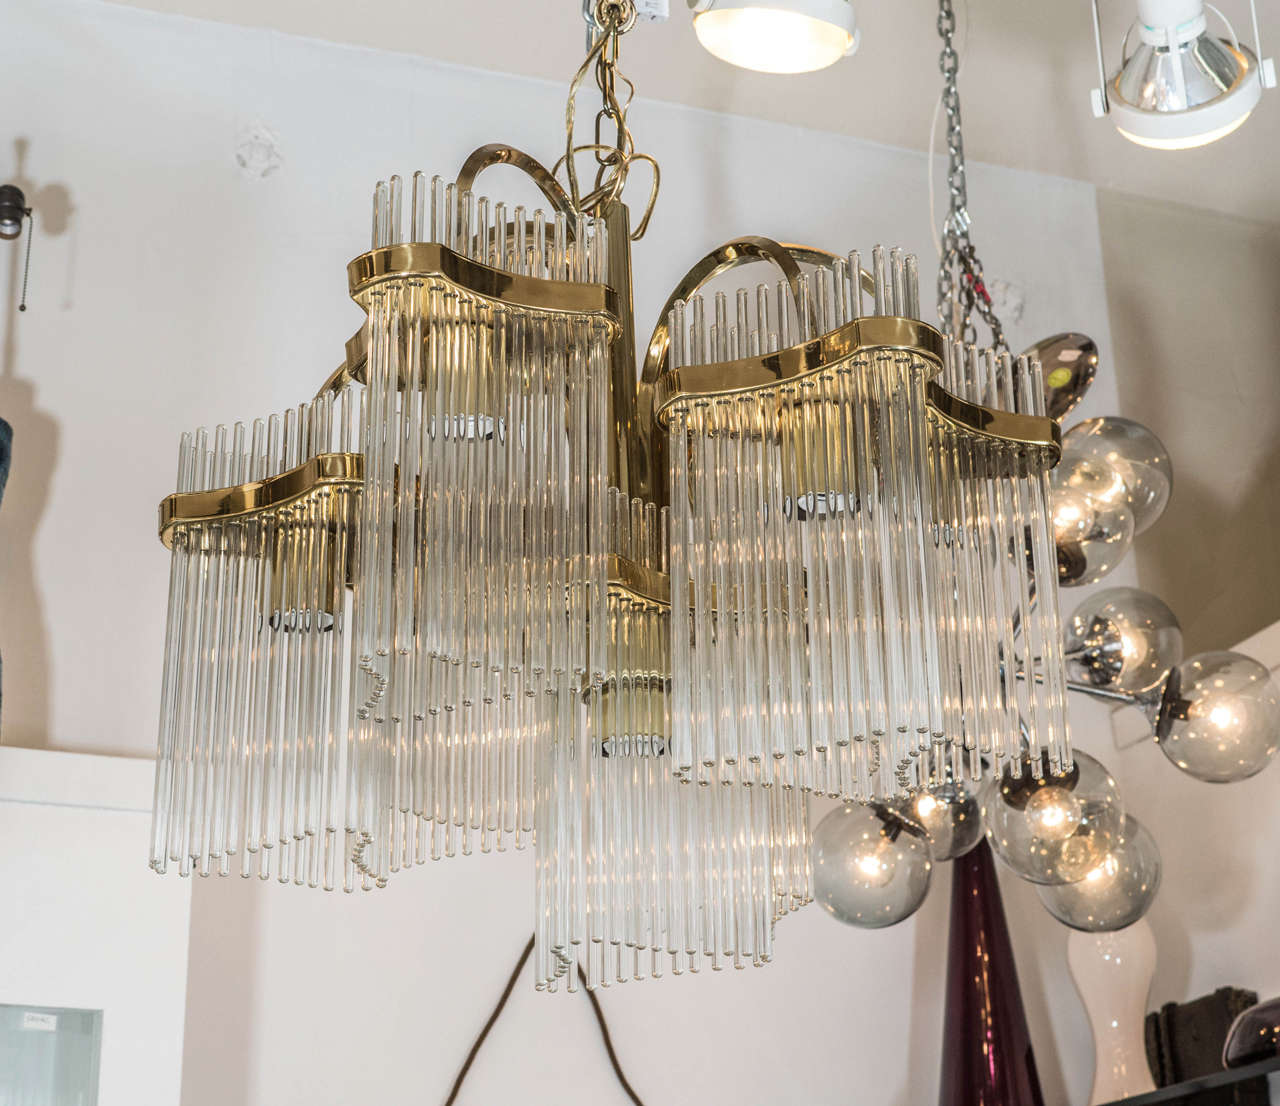 A vintage six-arm brass and glass rod chandelier by Gaetano Sciolari for Lightolier.

Reduced From: $3,200